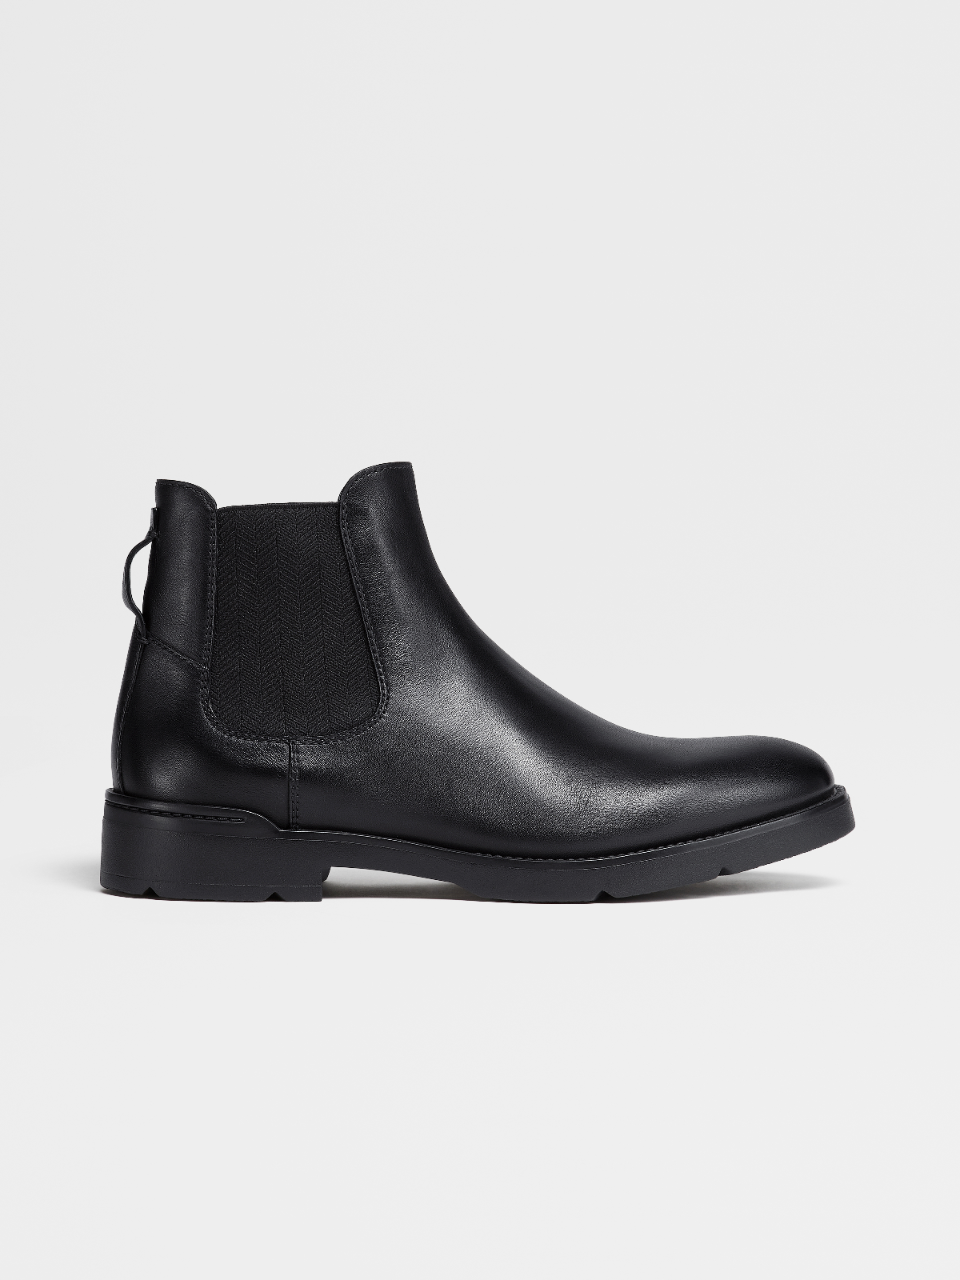 Black Cortina Leather Chelsea Boots